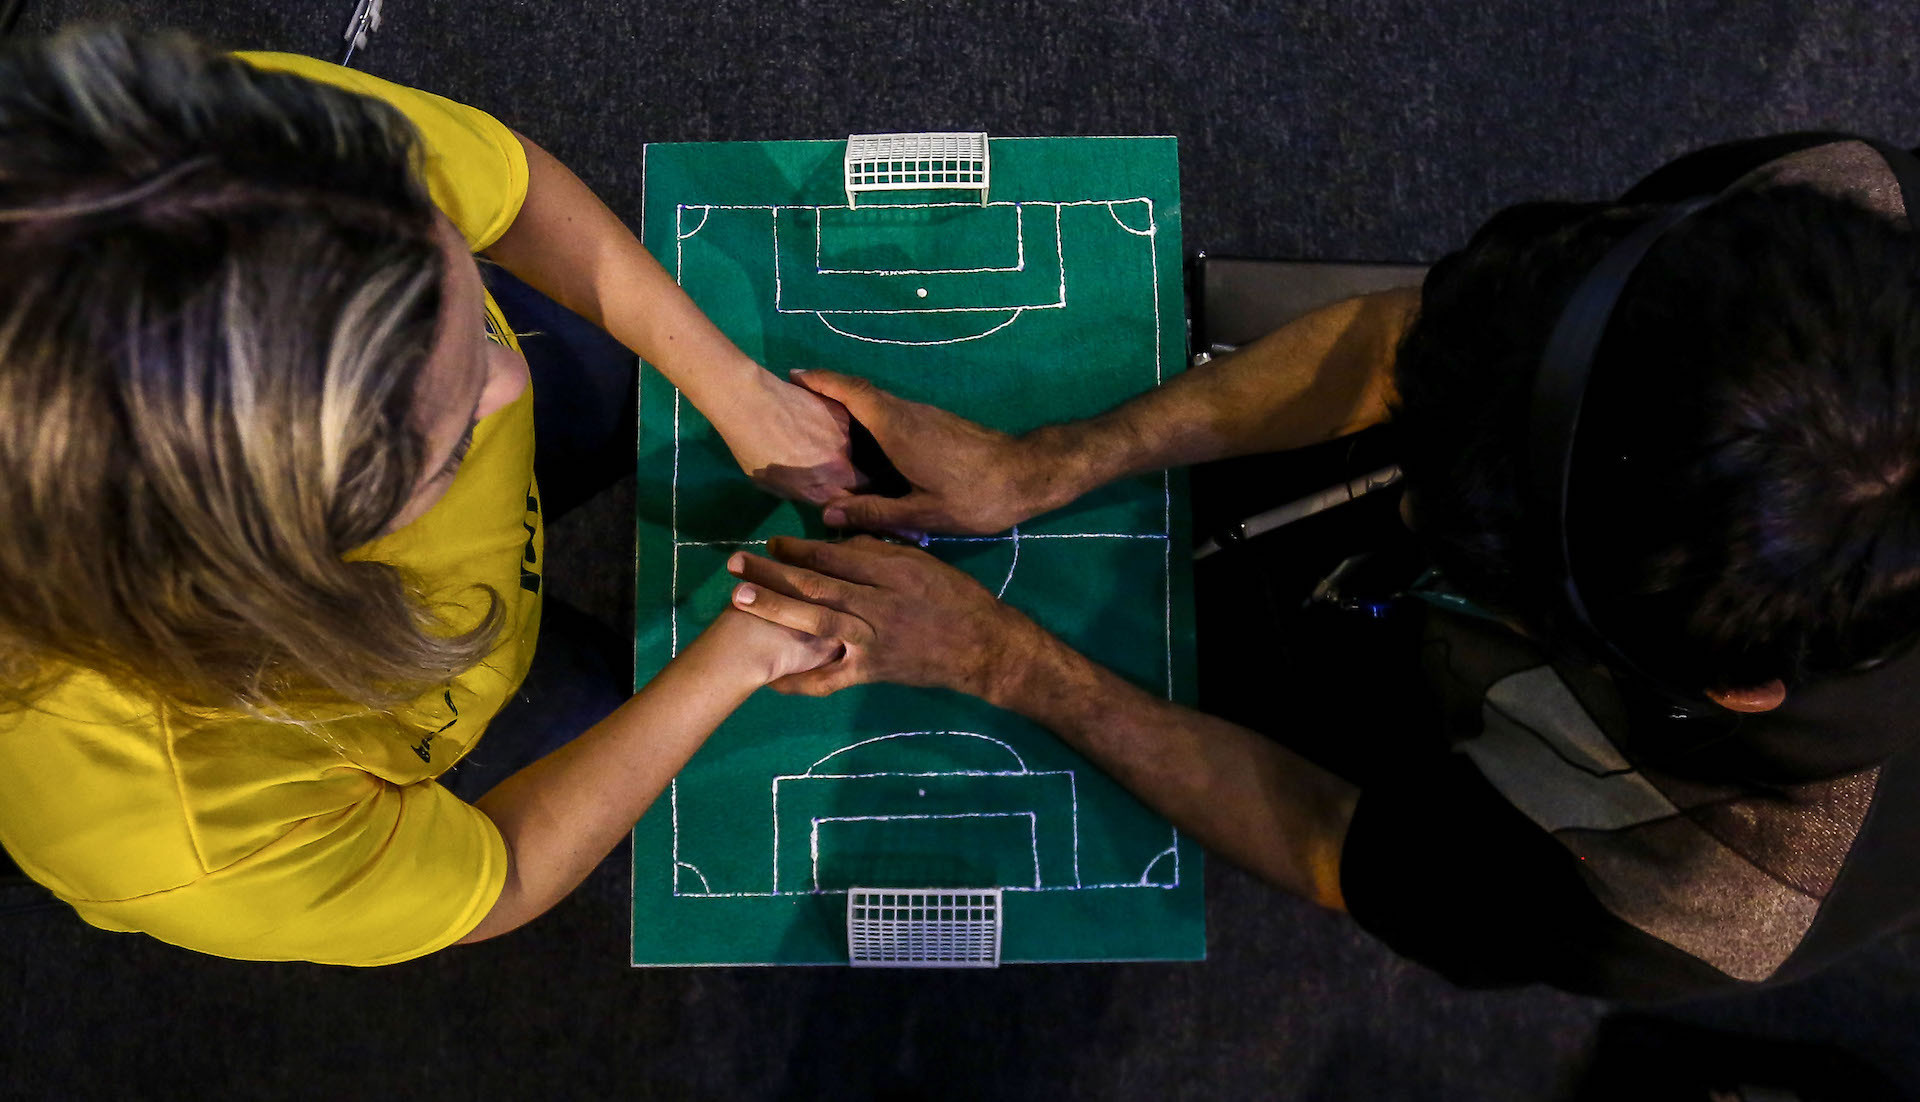 A blind-deaf football fan follows the game with the help of an interpreter. GETTY IMAGES